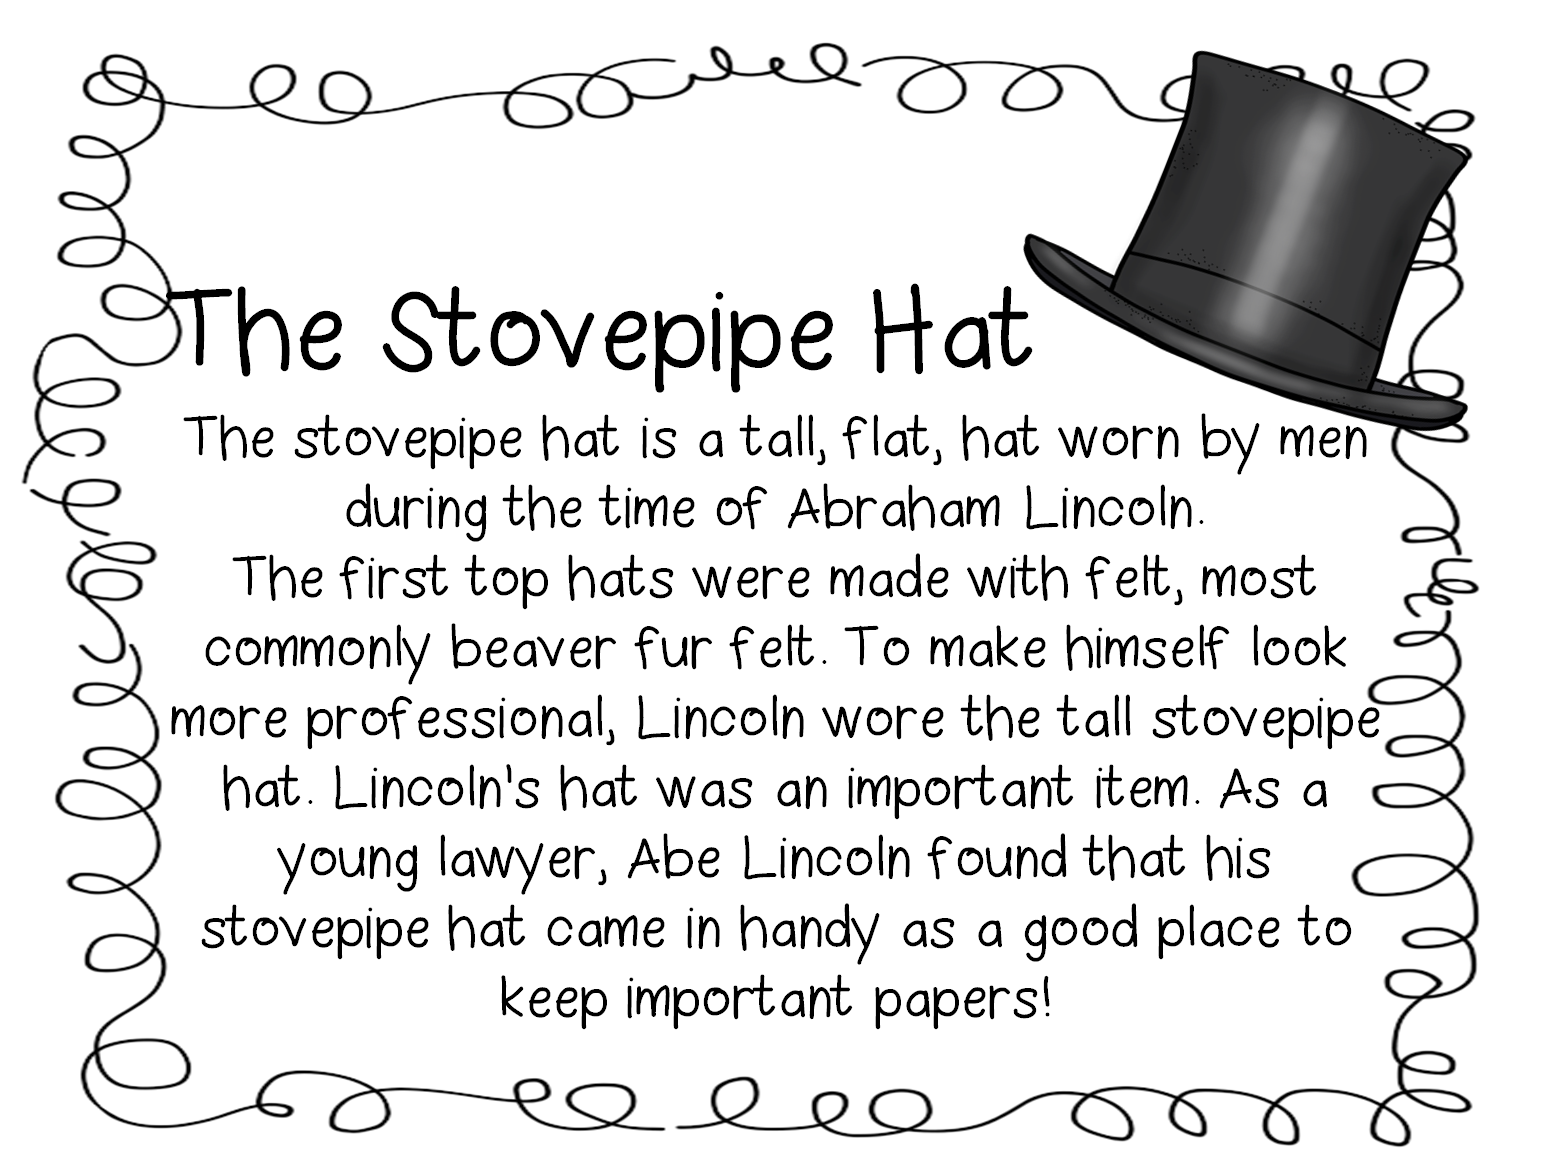 What are some poems about hats?